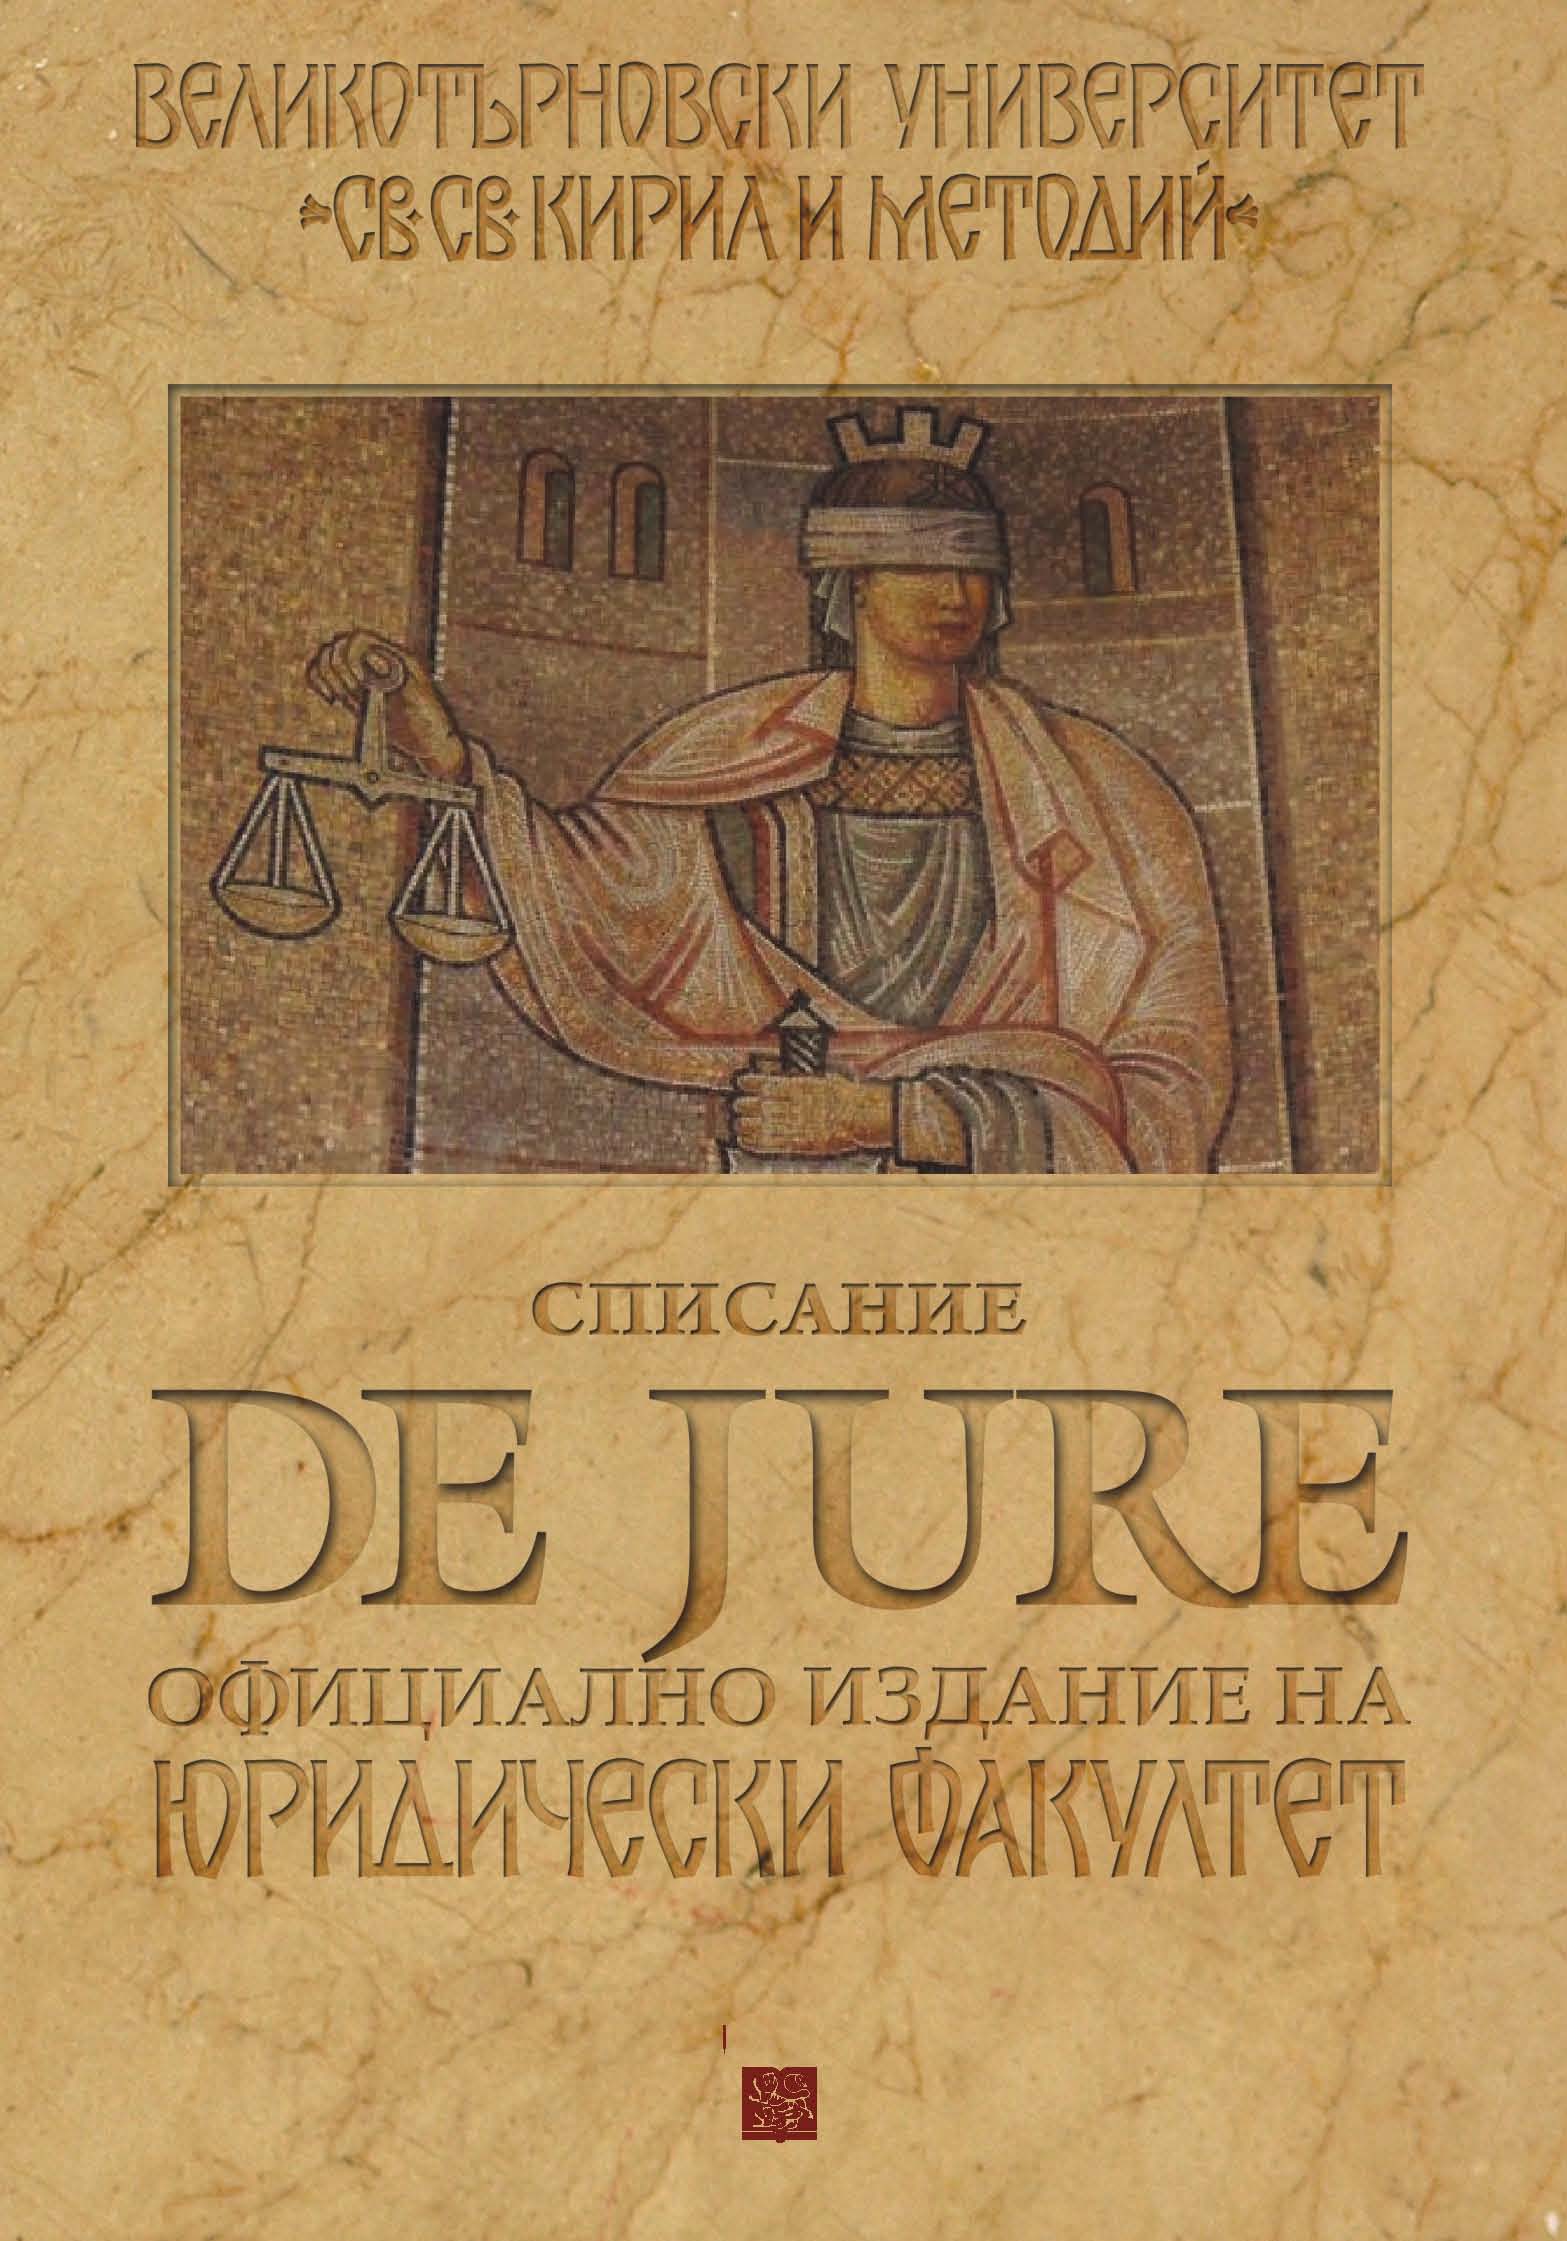 The commissions in the legal system of Republic of Bulgaria Cover Image